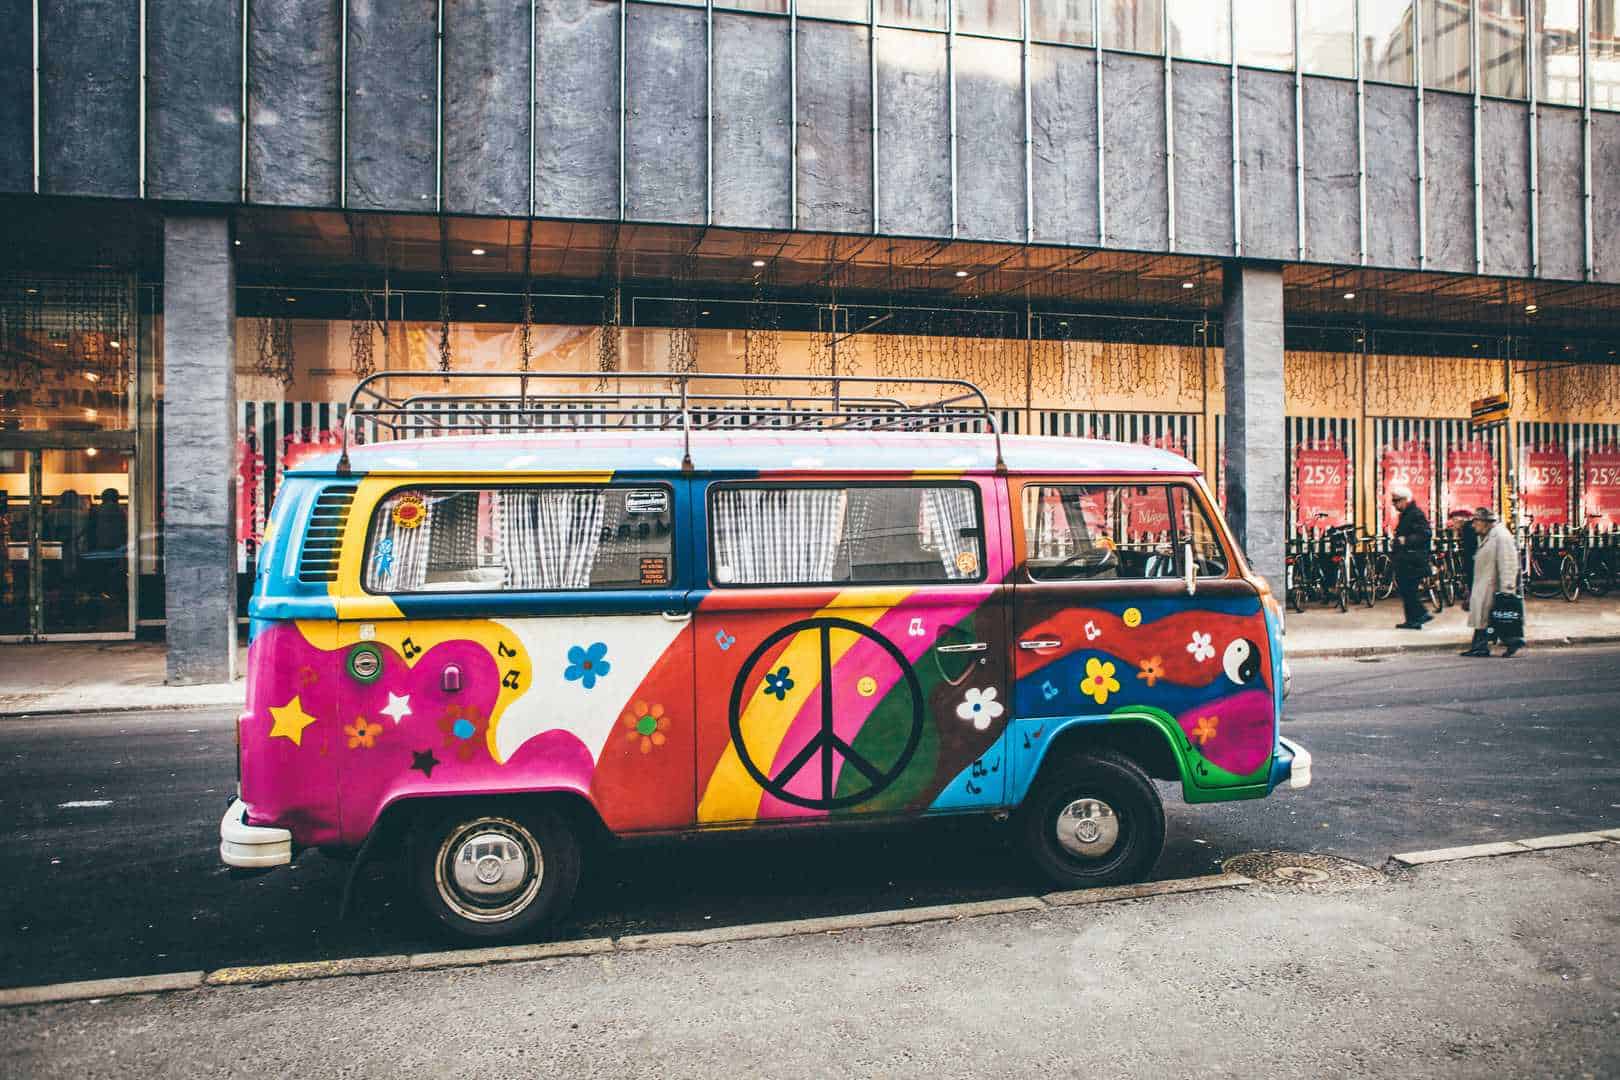 VW campervan with a painted peace symbol